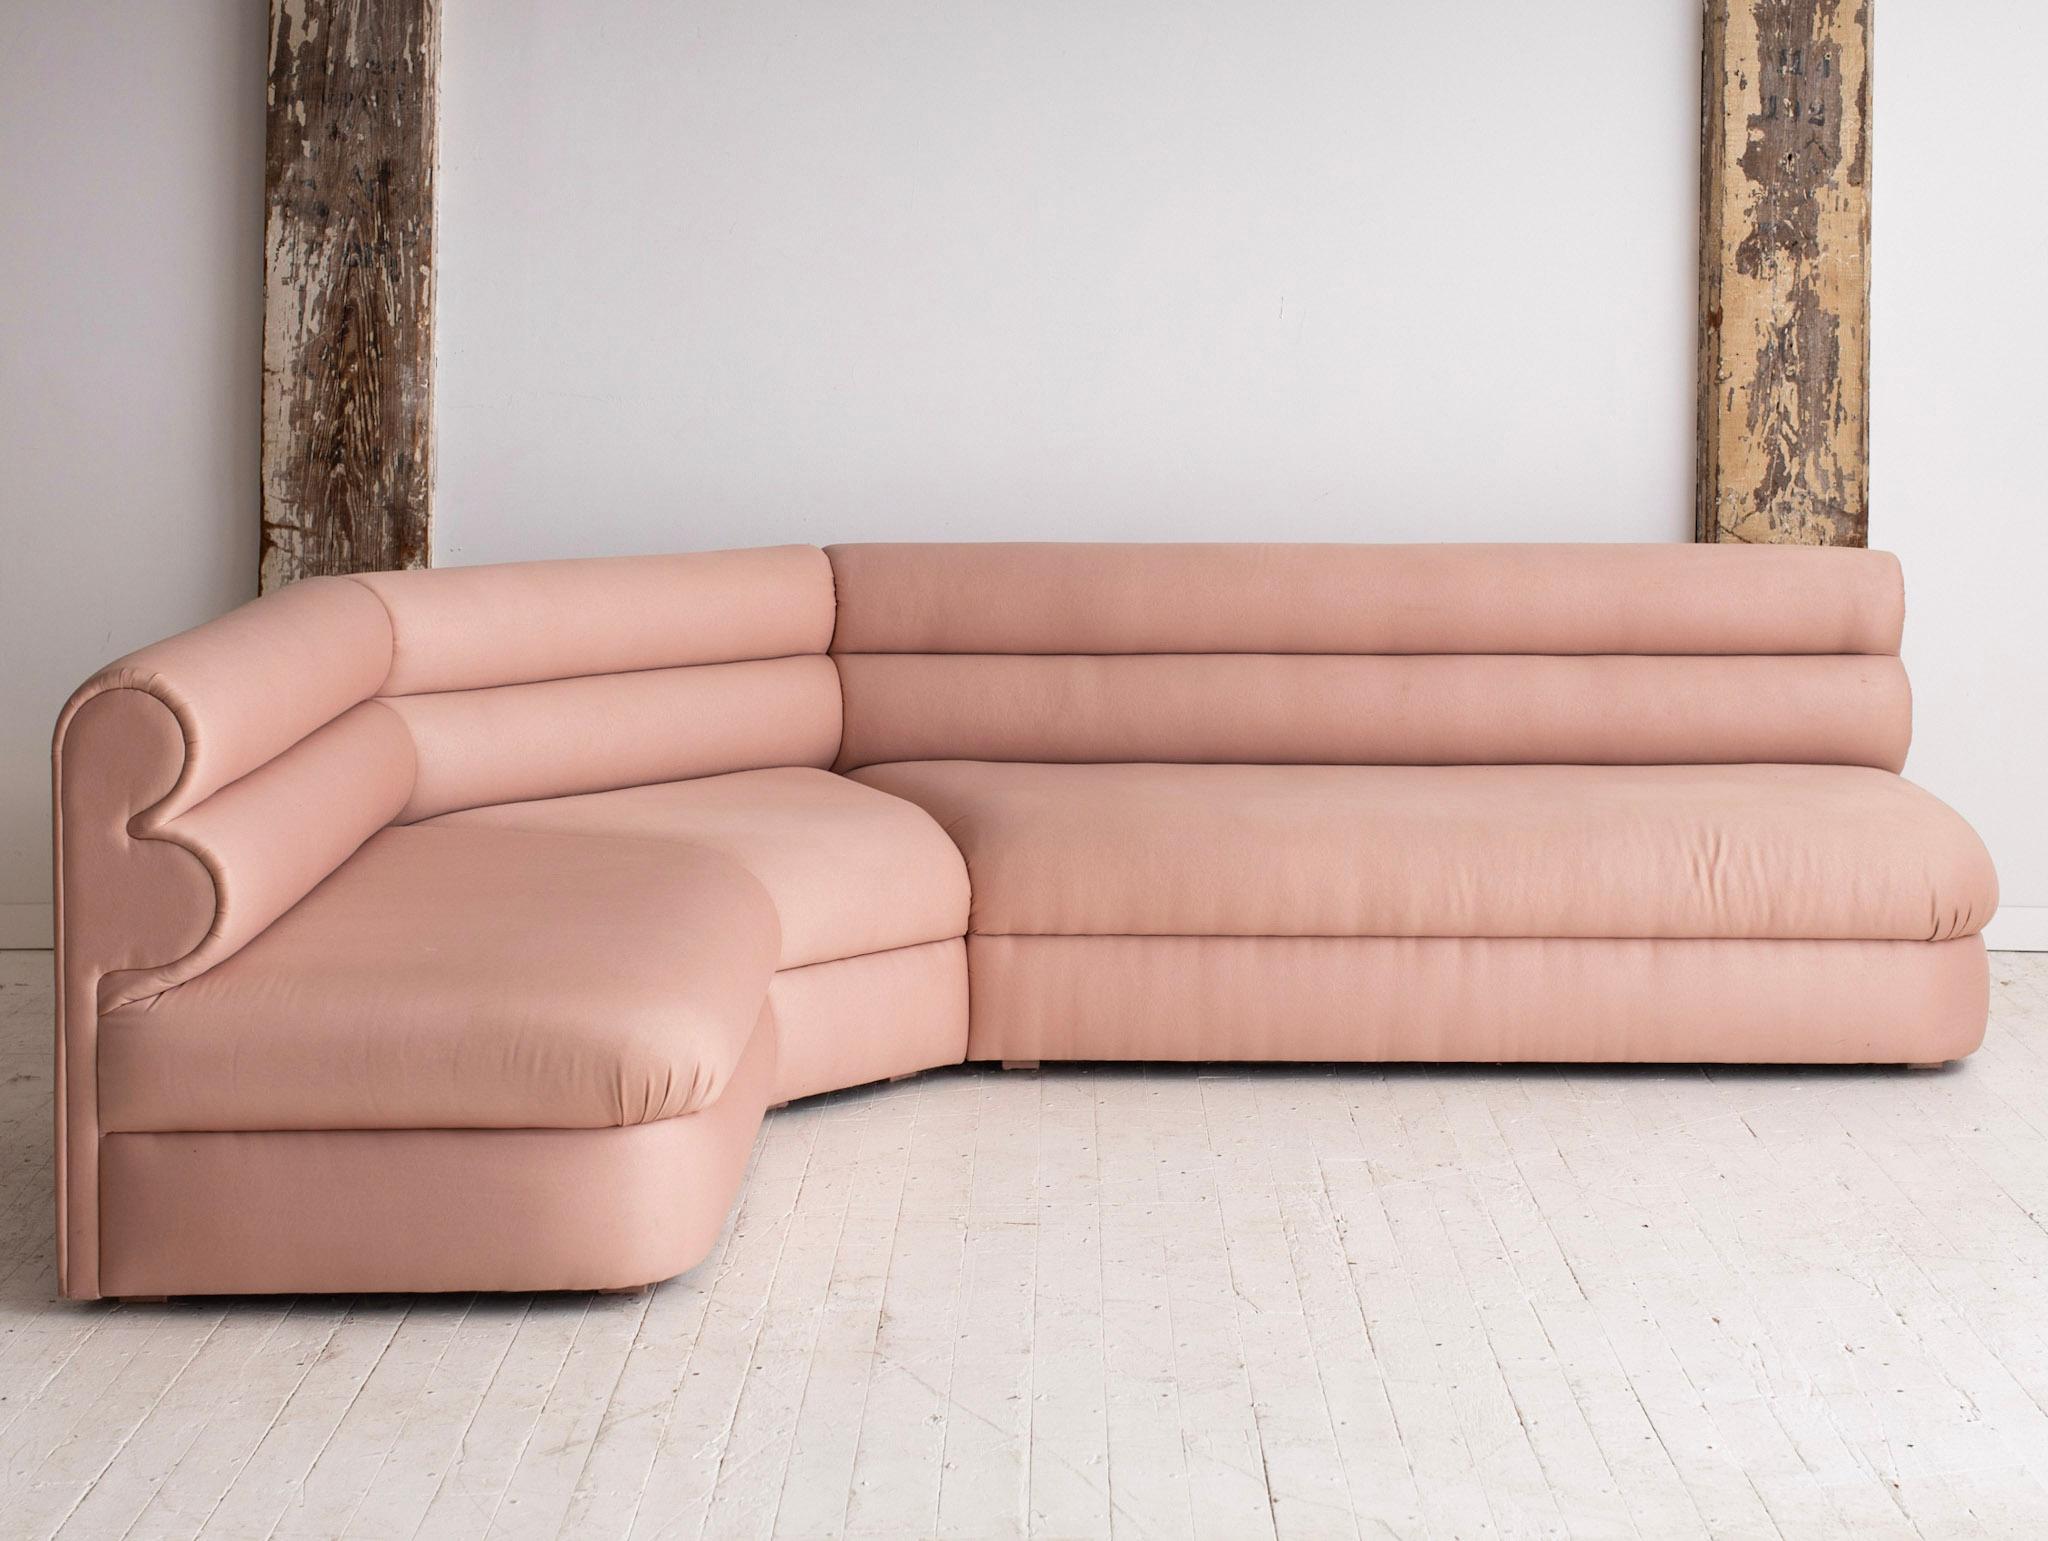 Three piece 80s Post Modern sectional. Original satin sheen blush fabric. Sculptural channeled back gives off a great graphic silhouette. Pieces interlock securely with wood clips. Sourced in South Florida. 
Individual measurements:
Longest piece: